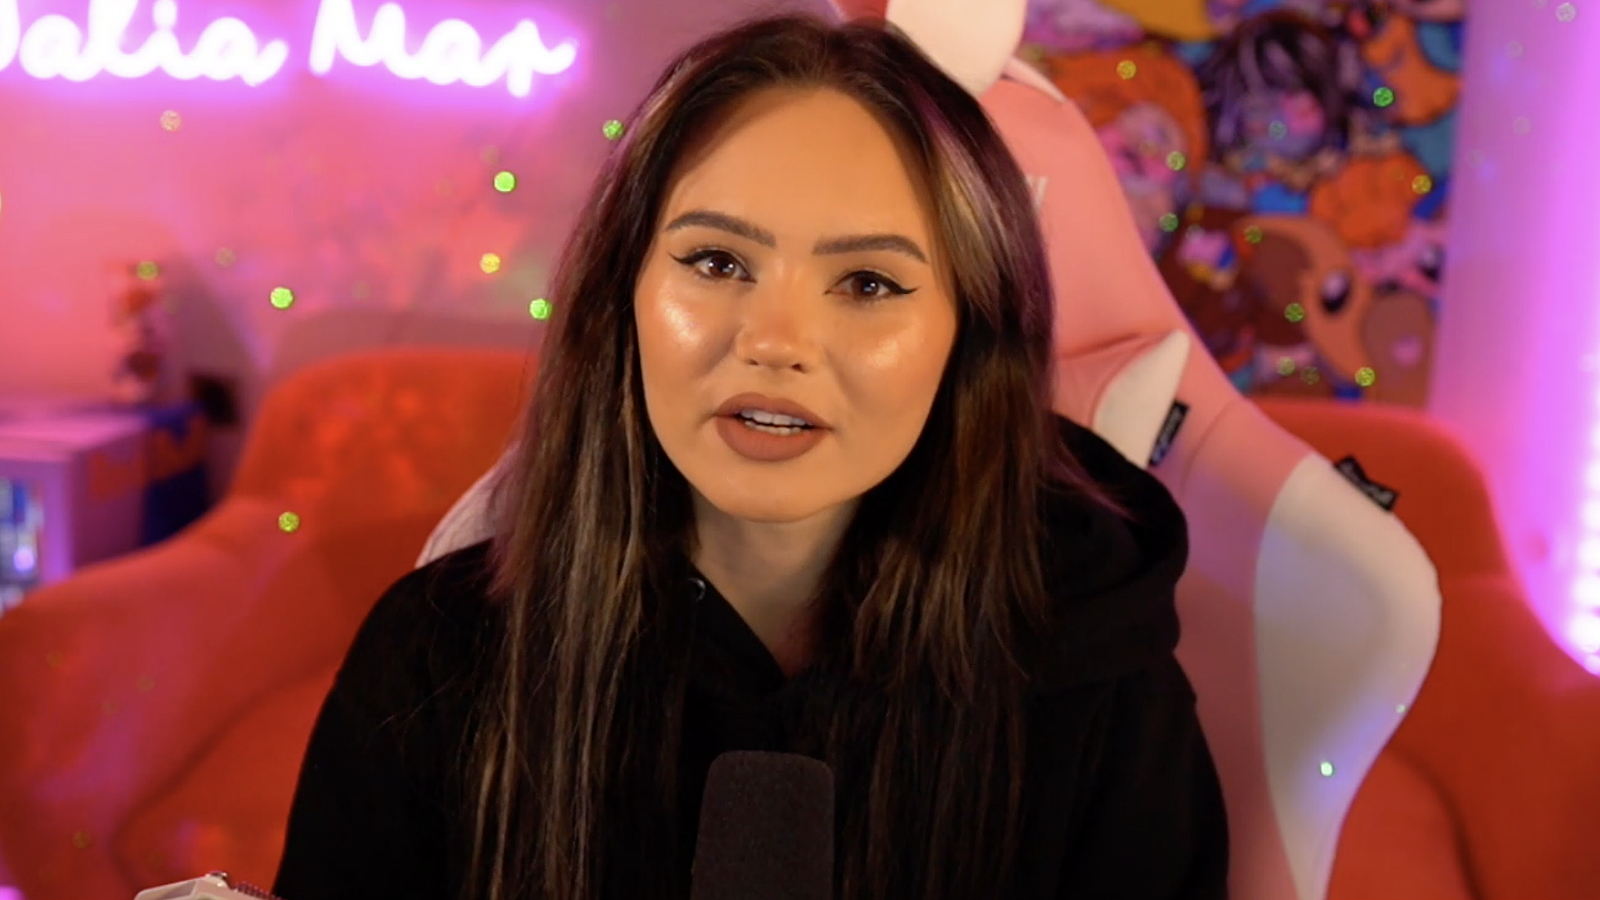 Talia Mar mocks “gross” Twitch viewers over her most-viewed clips - Dexerto